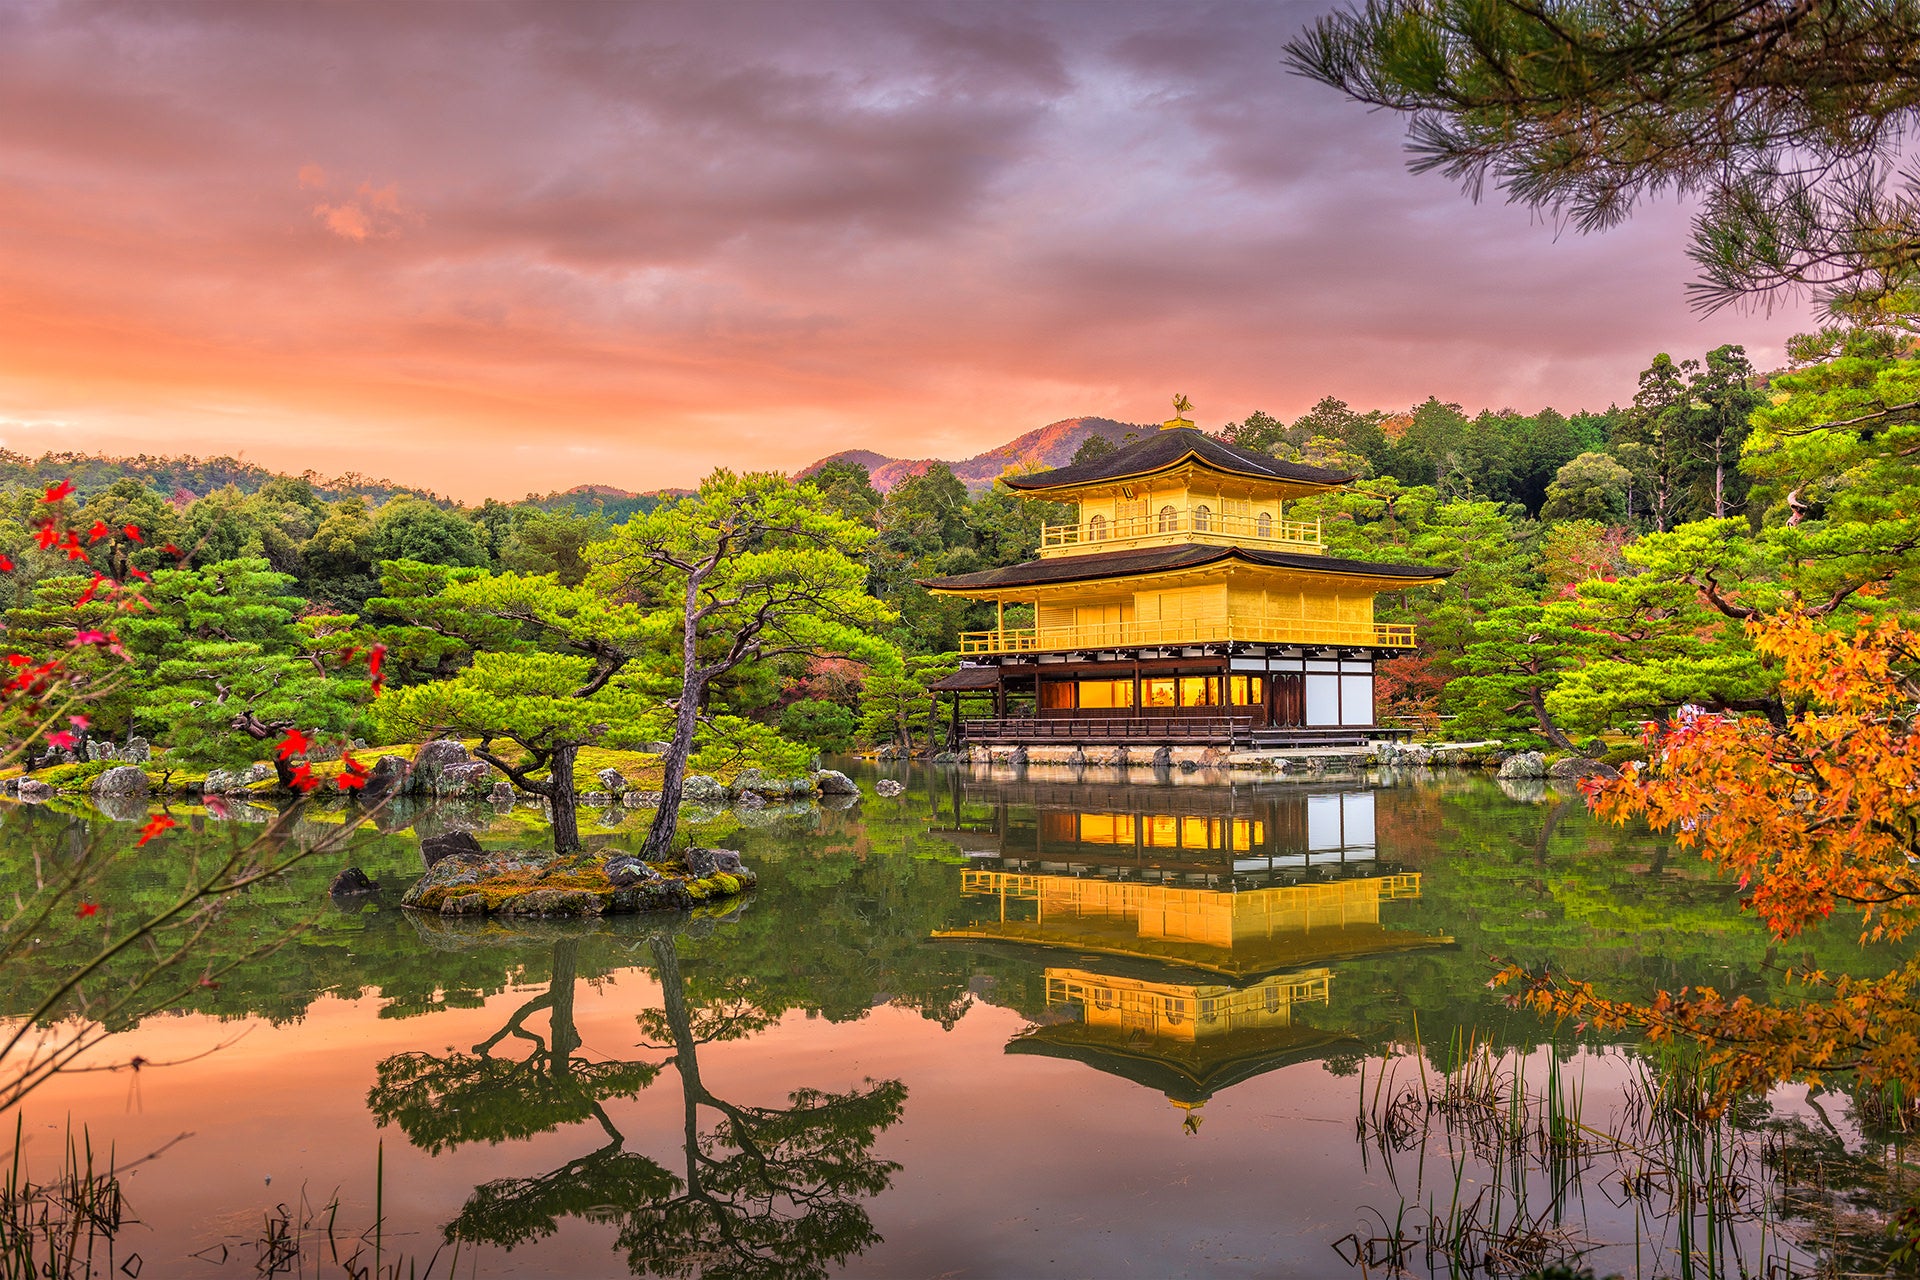 As shogun, Ieyasu instituted a series of policies that helped stabilize the country and promote economic growth.